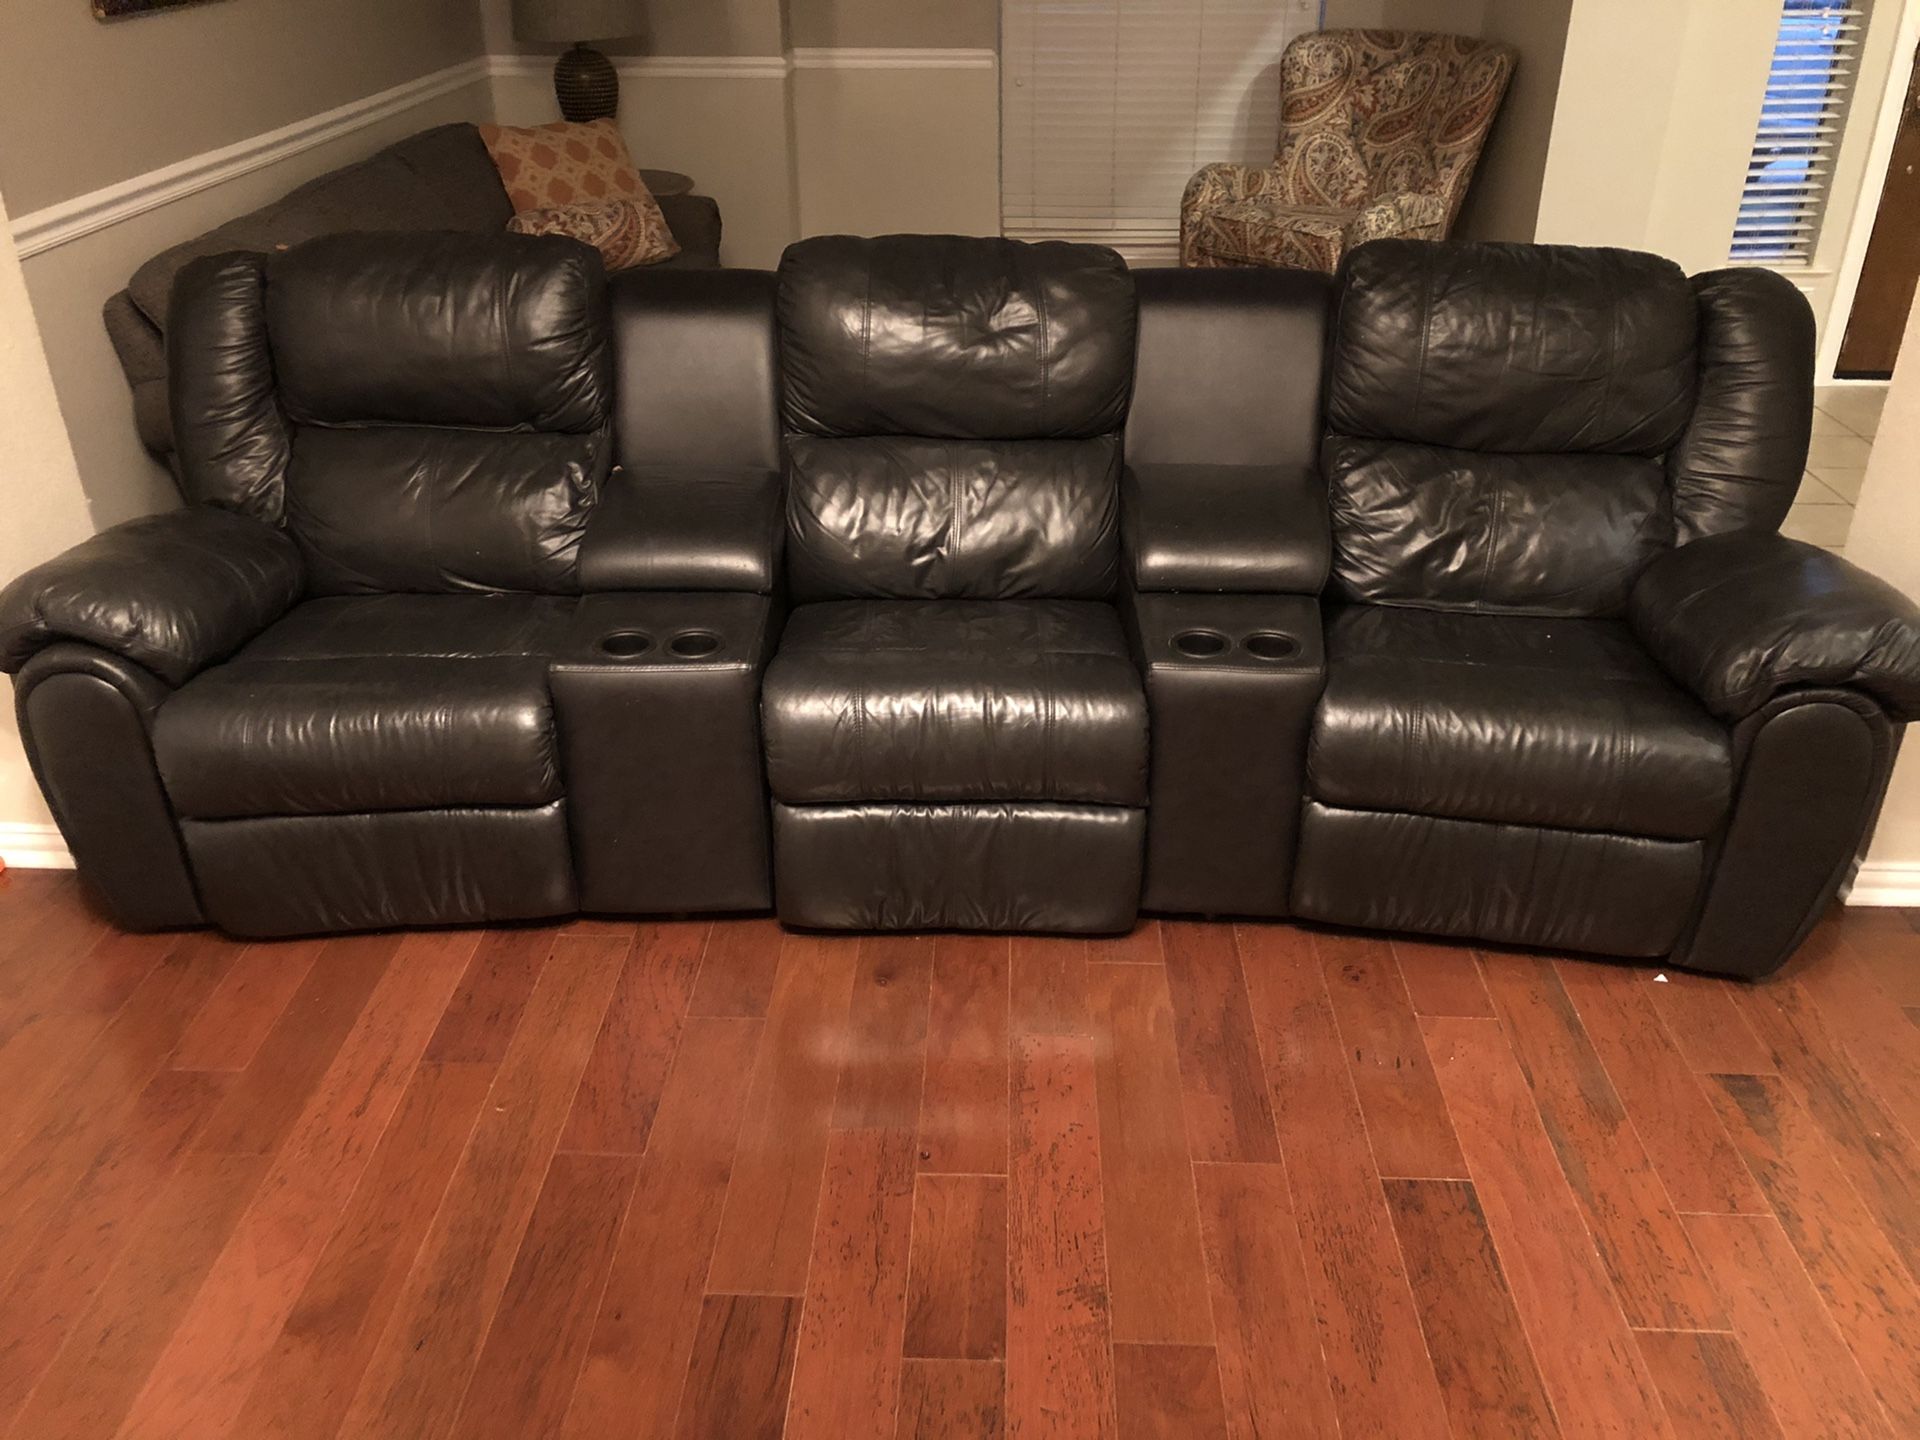 Media room couch